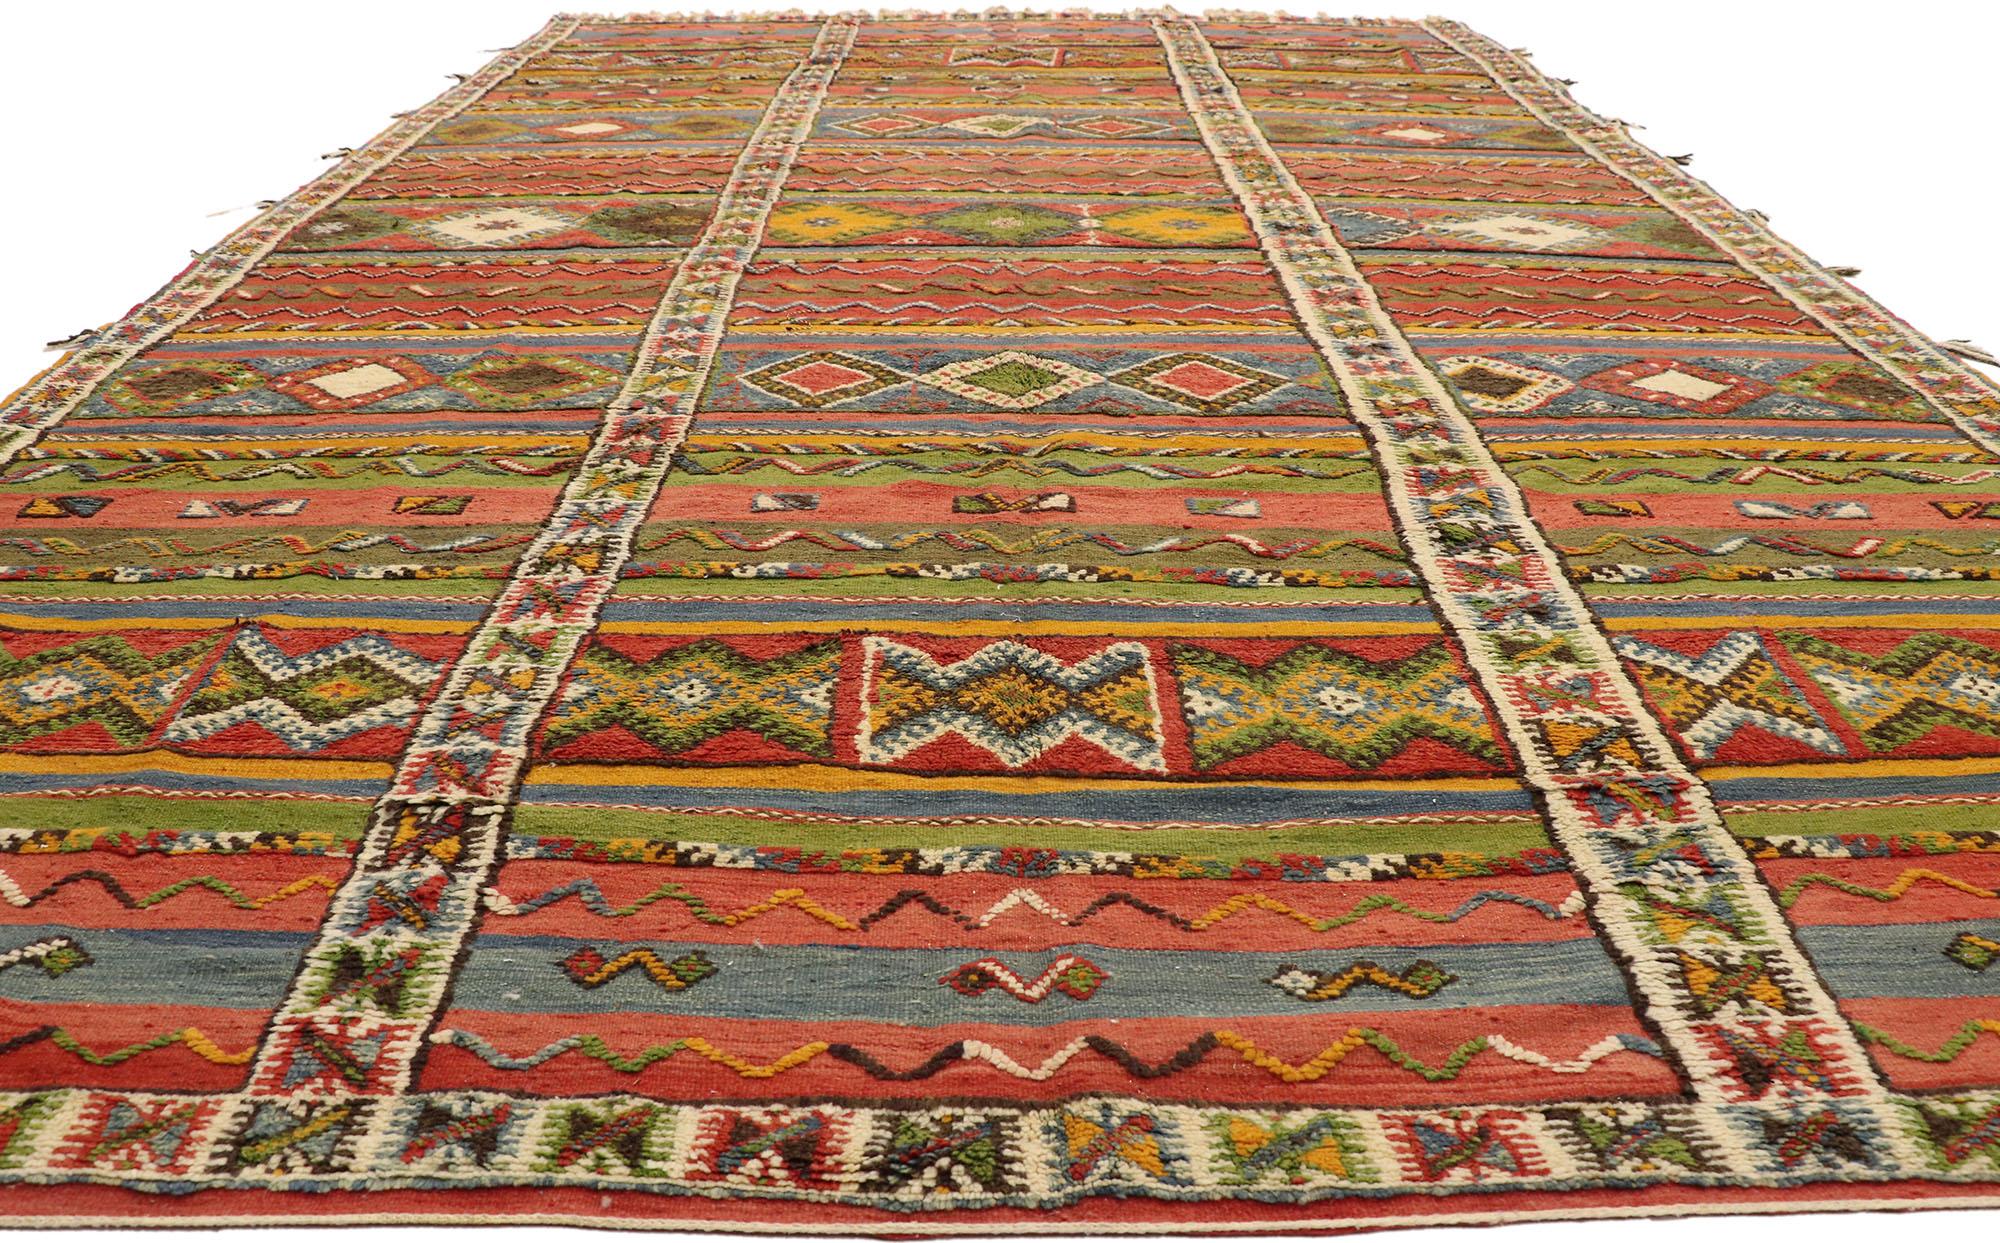 Hand-Woven Vintage Berber Moroccan Kilim Glaoui Rug with Modern Tribal Style